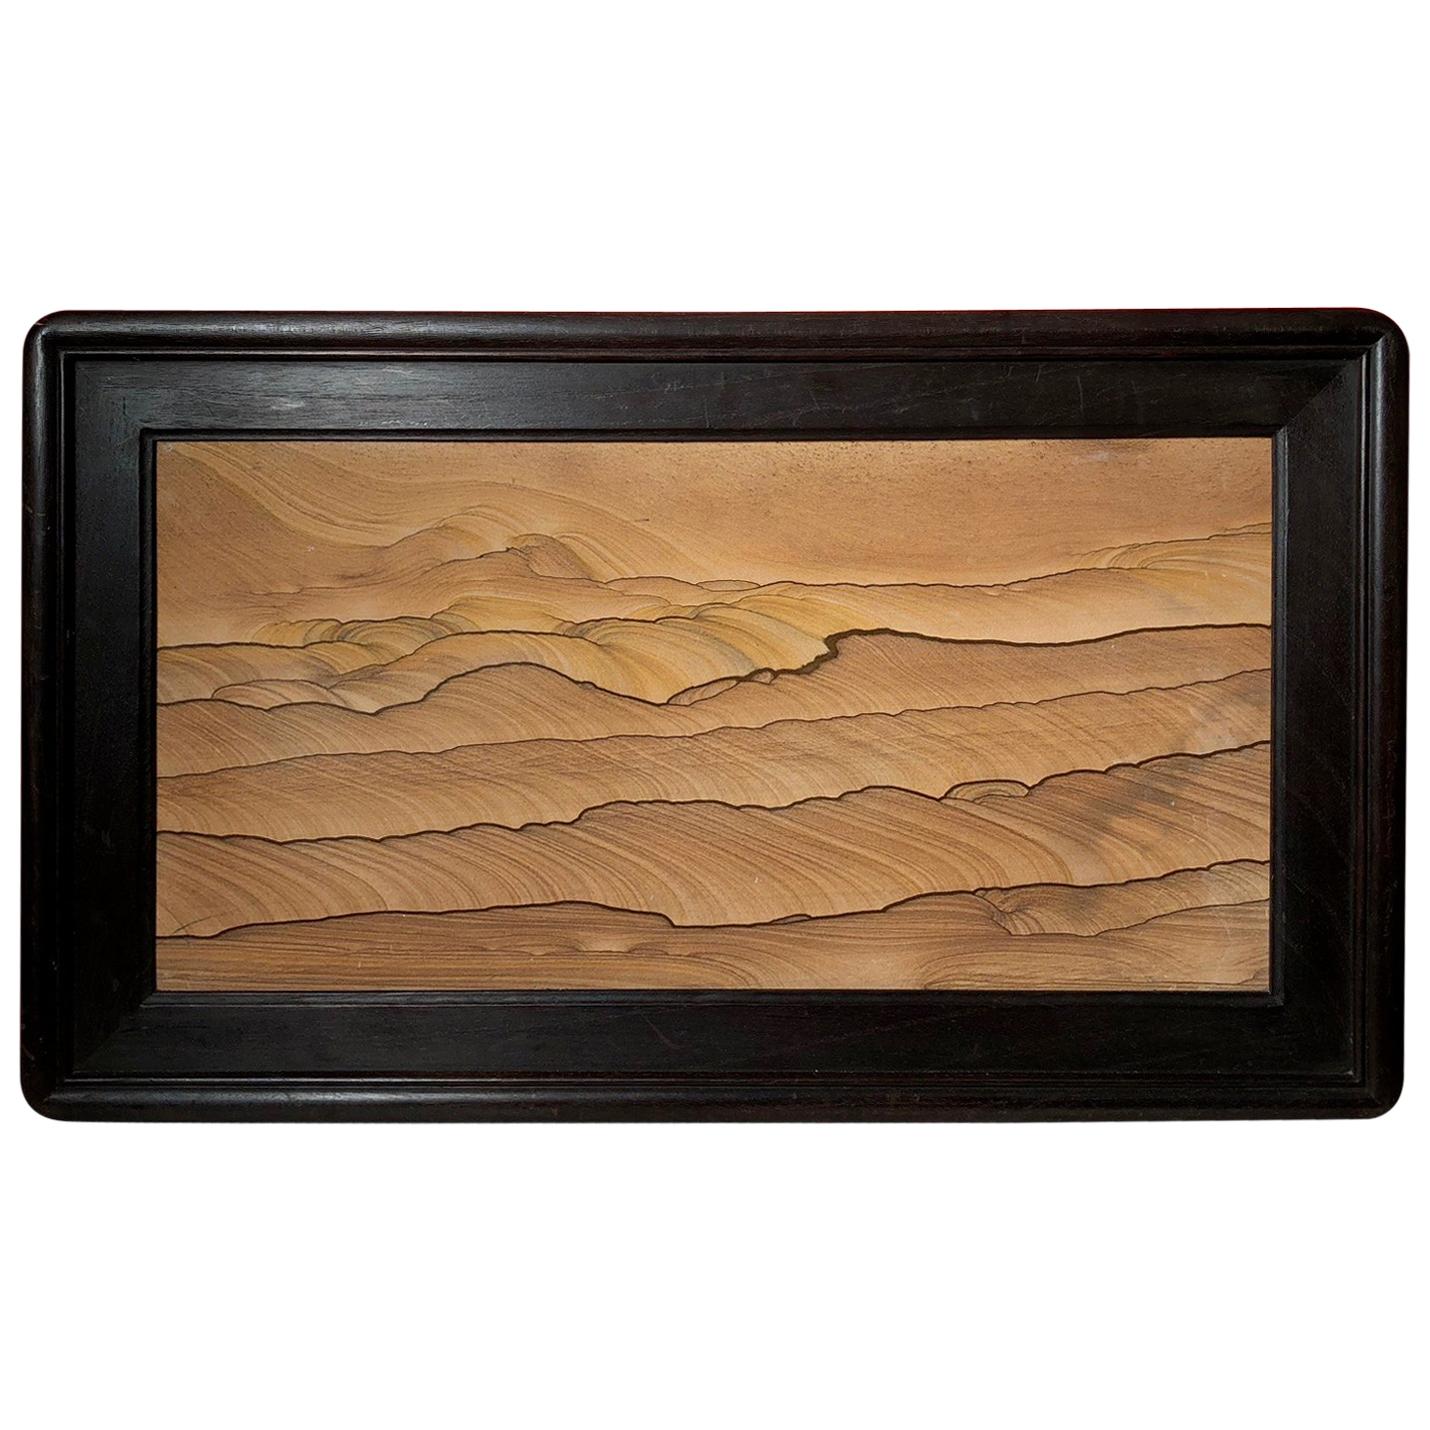 Dunes Galore Extraordinary Natural Stone Painting, One-of-a- Kind